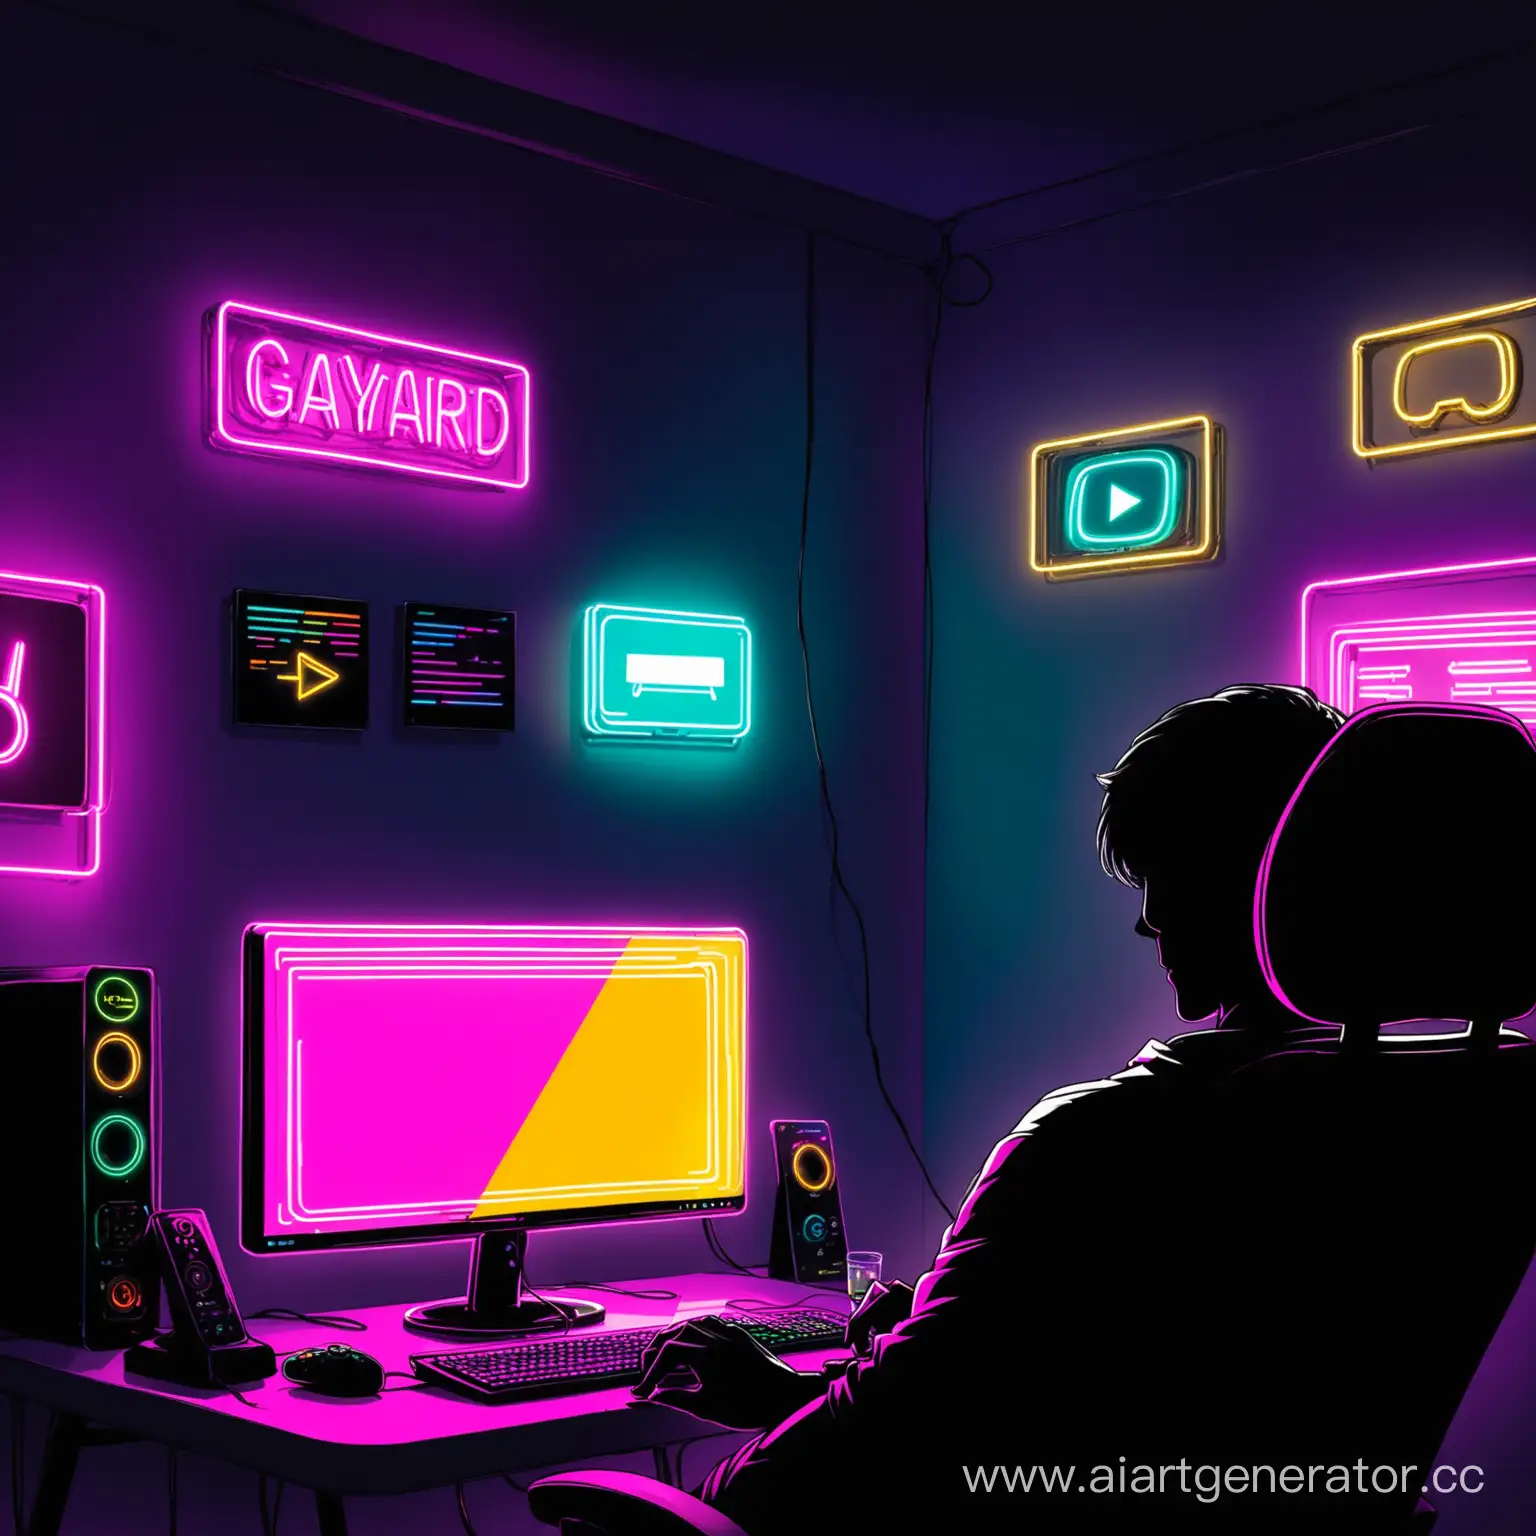 Silhouette-of-Man-Gaming-in-Neonlit-Studio-with-YouTube-Buttons